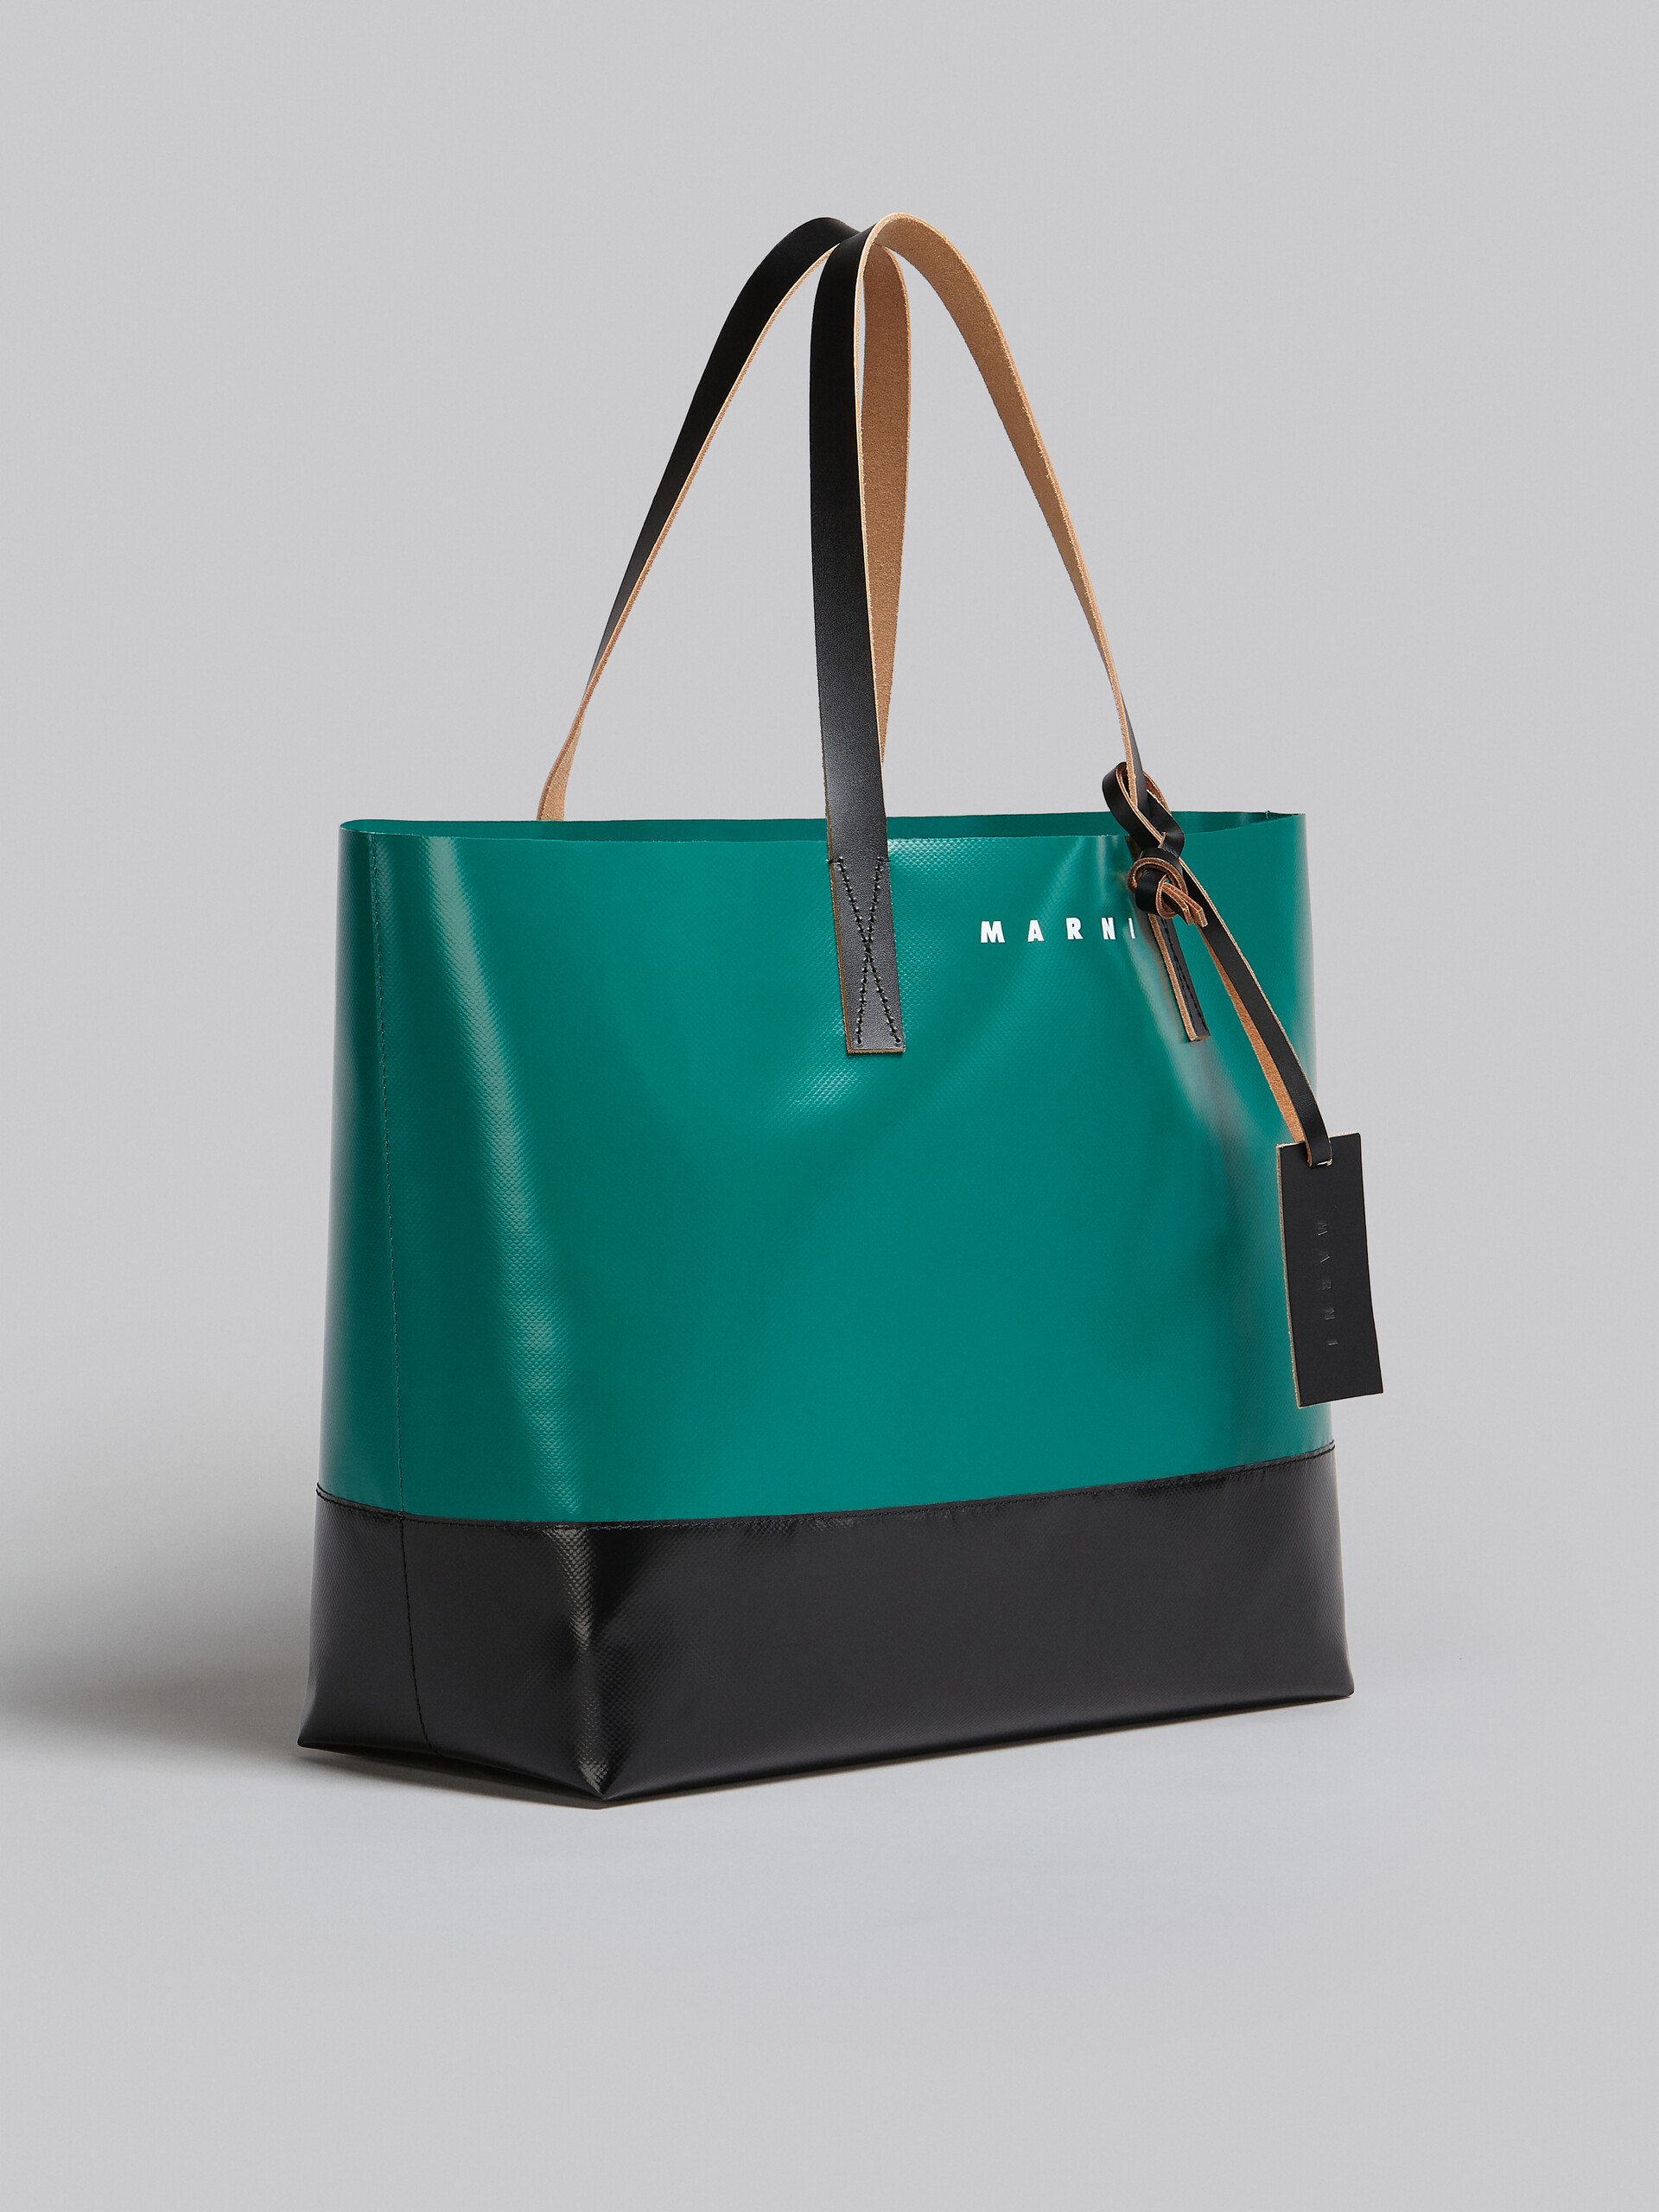 Tribeca shopping bag in green and black - Shopping Bags - Image 6